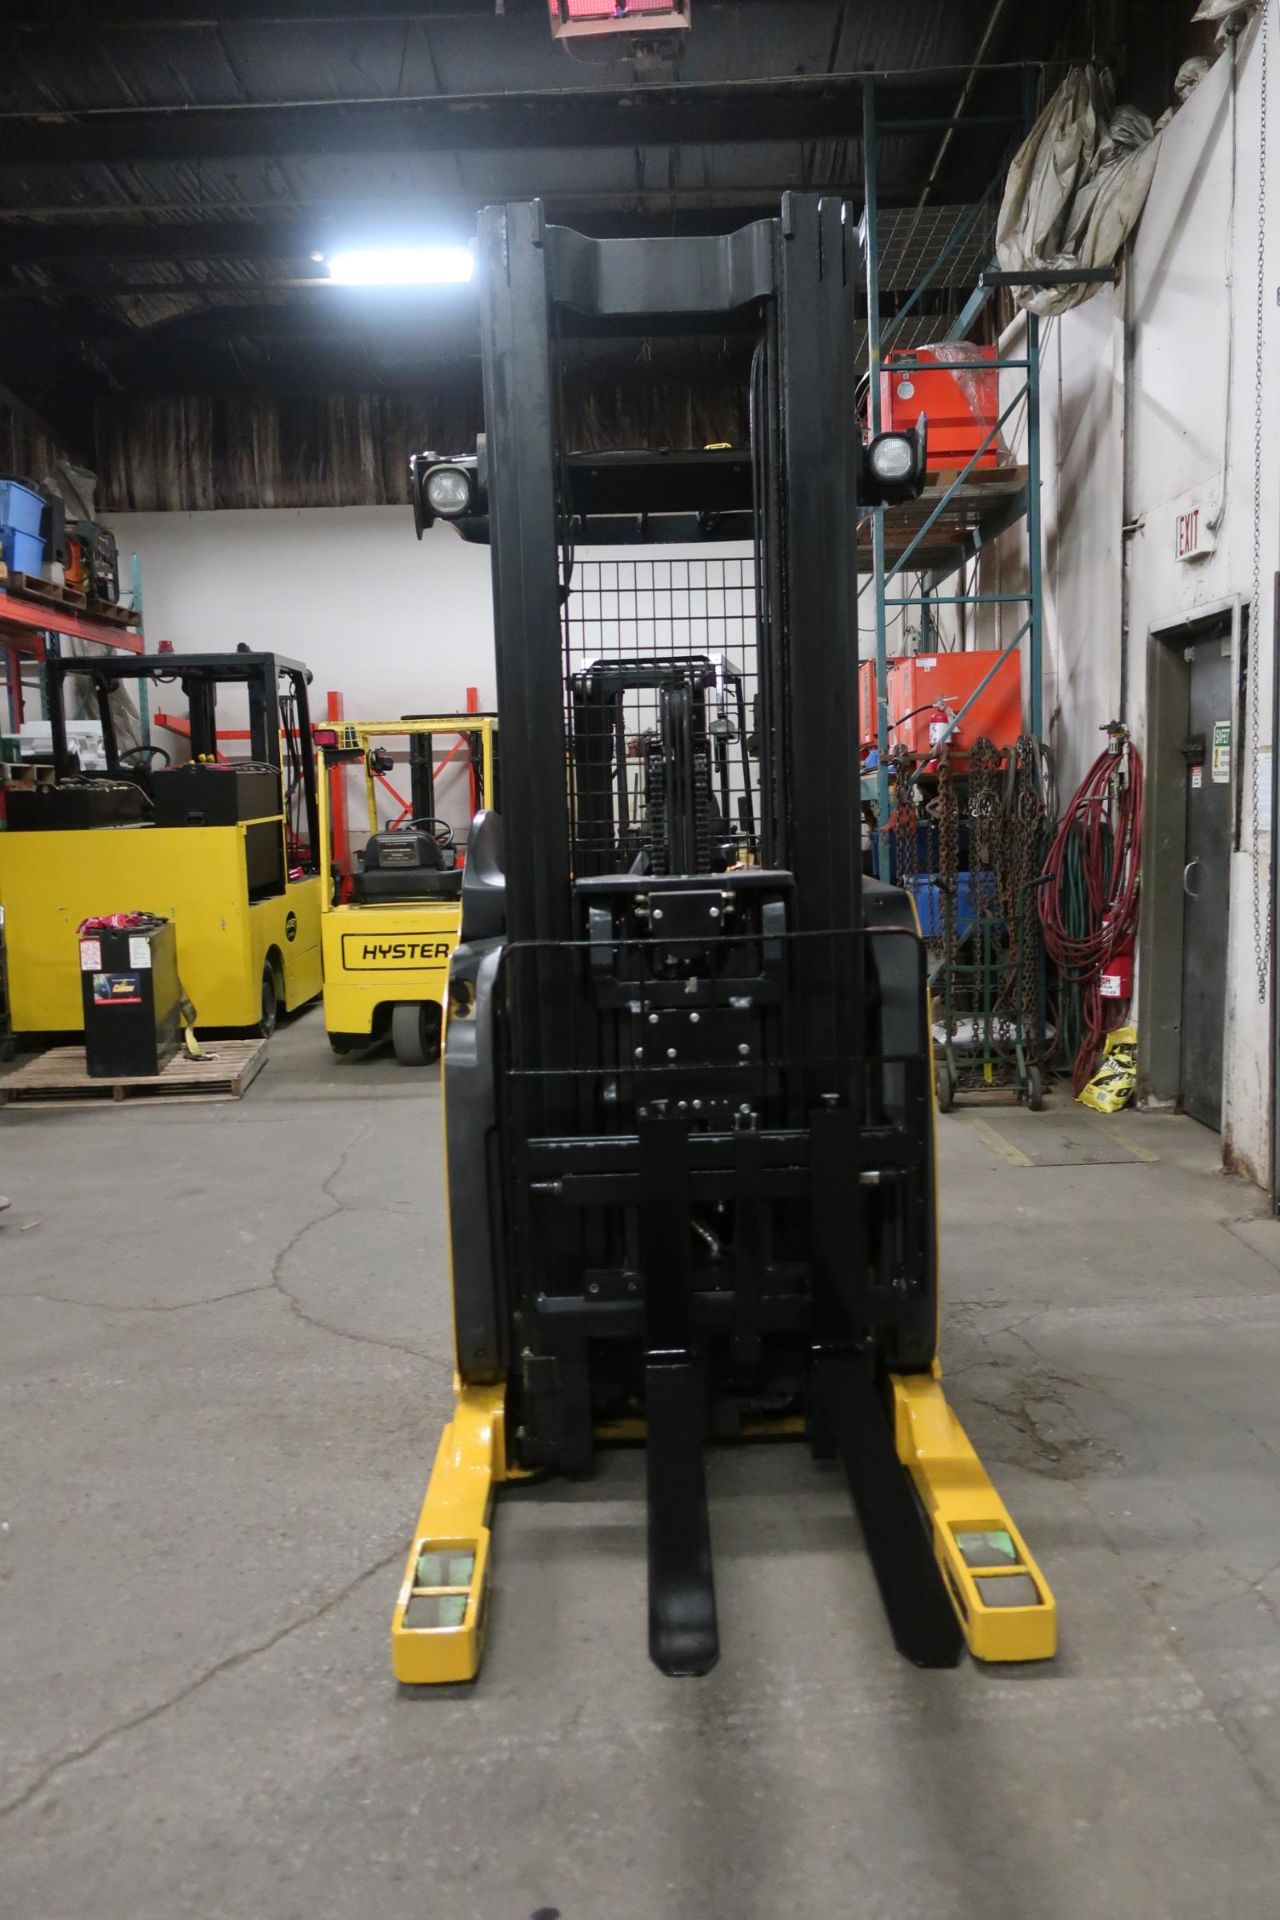 2011 Yale Reach Truck Pallet Lifter 3500lbs capacity unit ELECTRIC with sideshift - Image 2 of 3